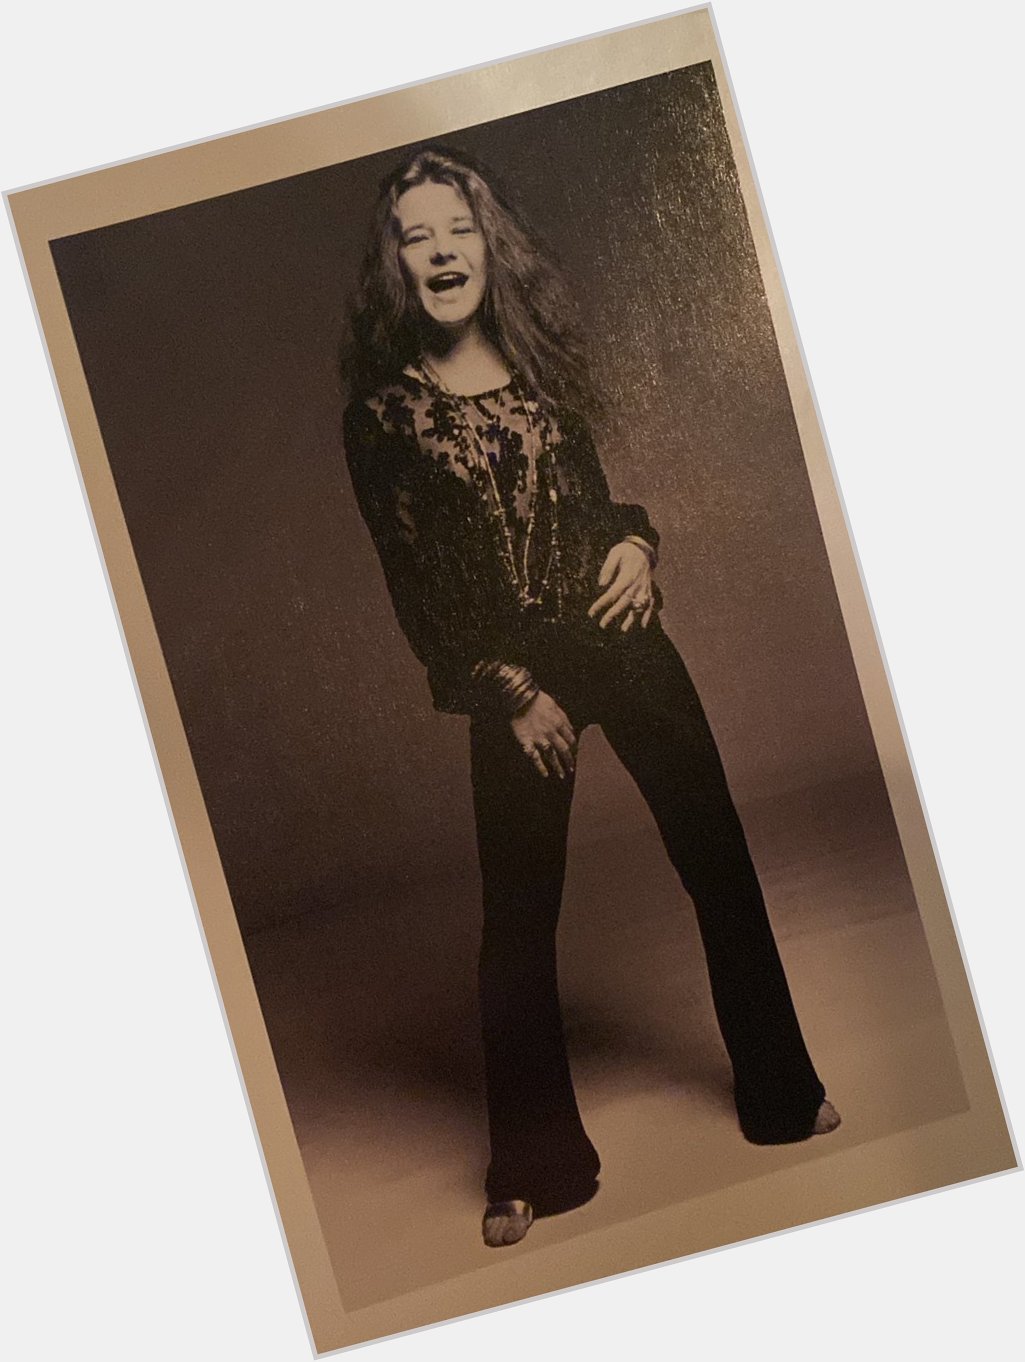  Don t compromise yourself, you re all you ve got.  happy birthday to the late great Capricorn queen, Janis Joplin 